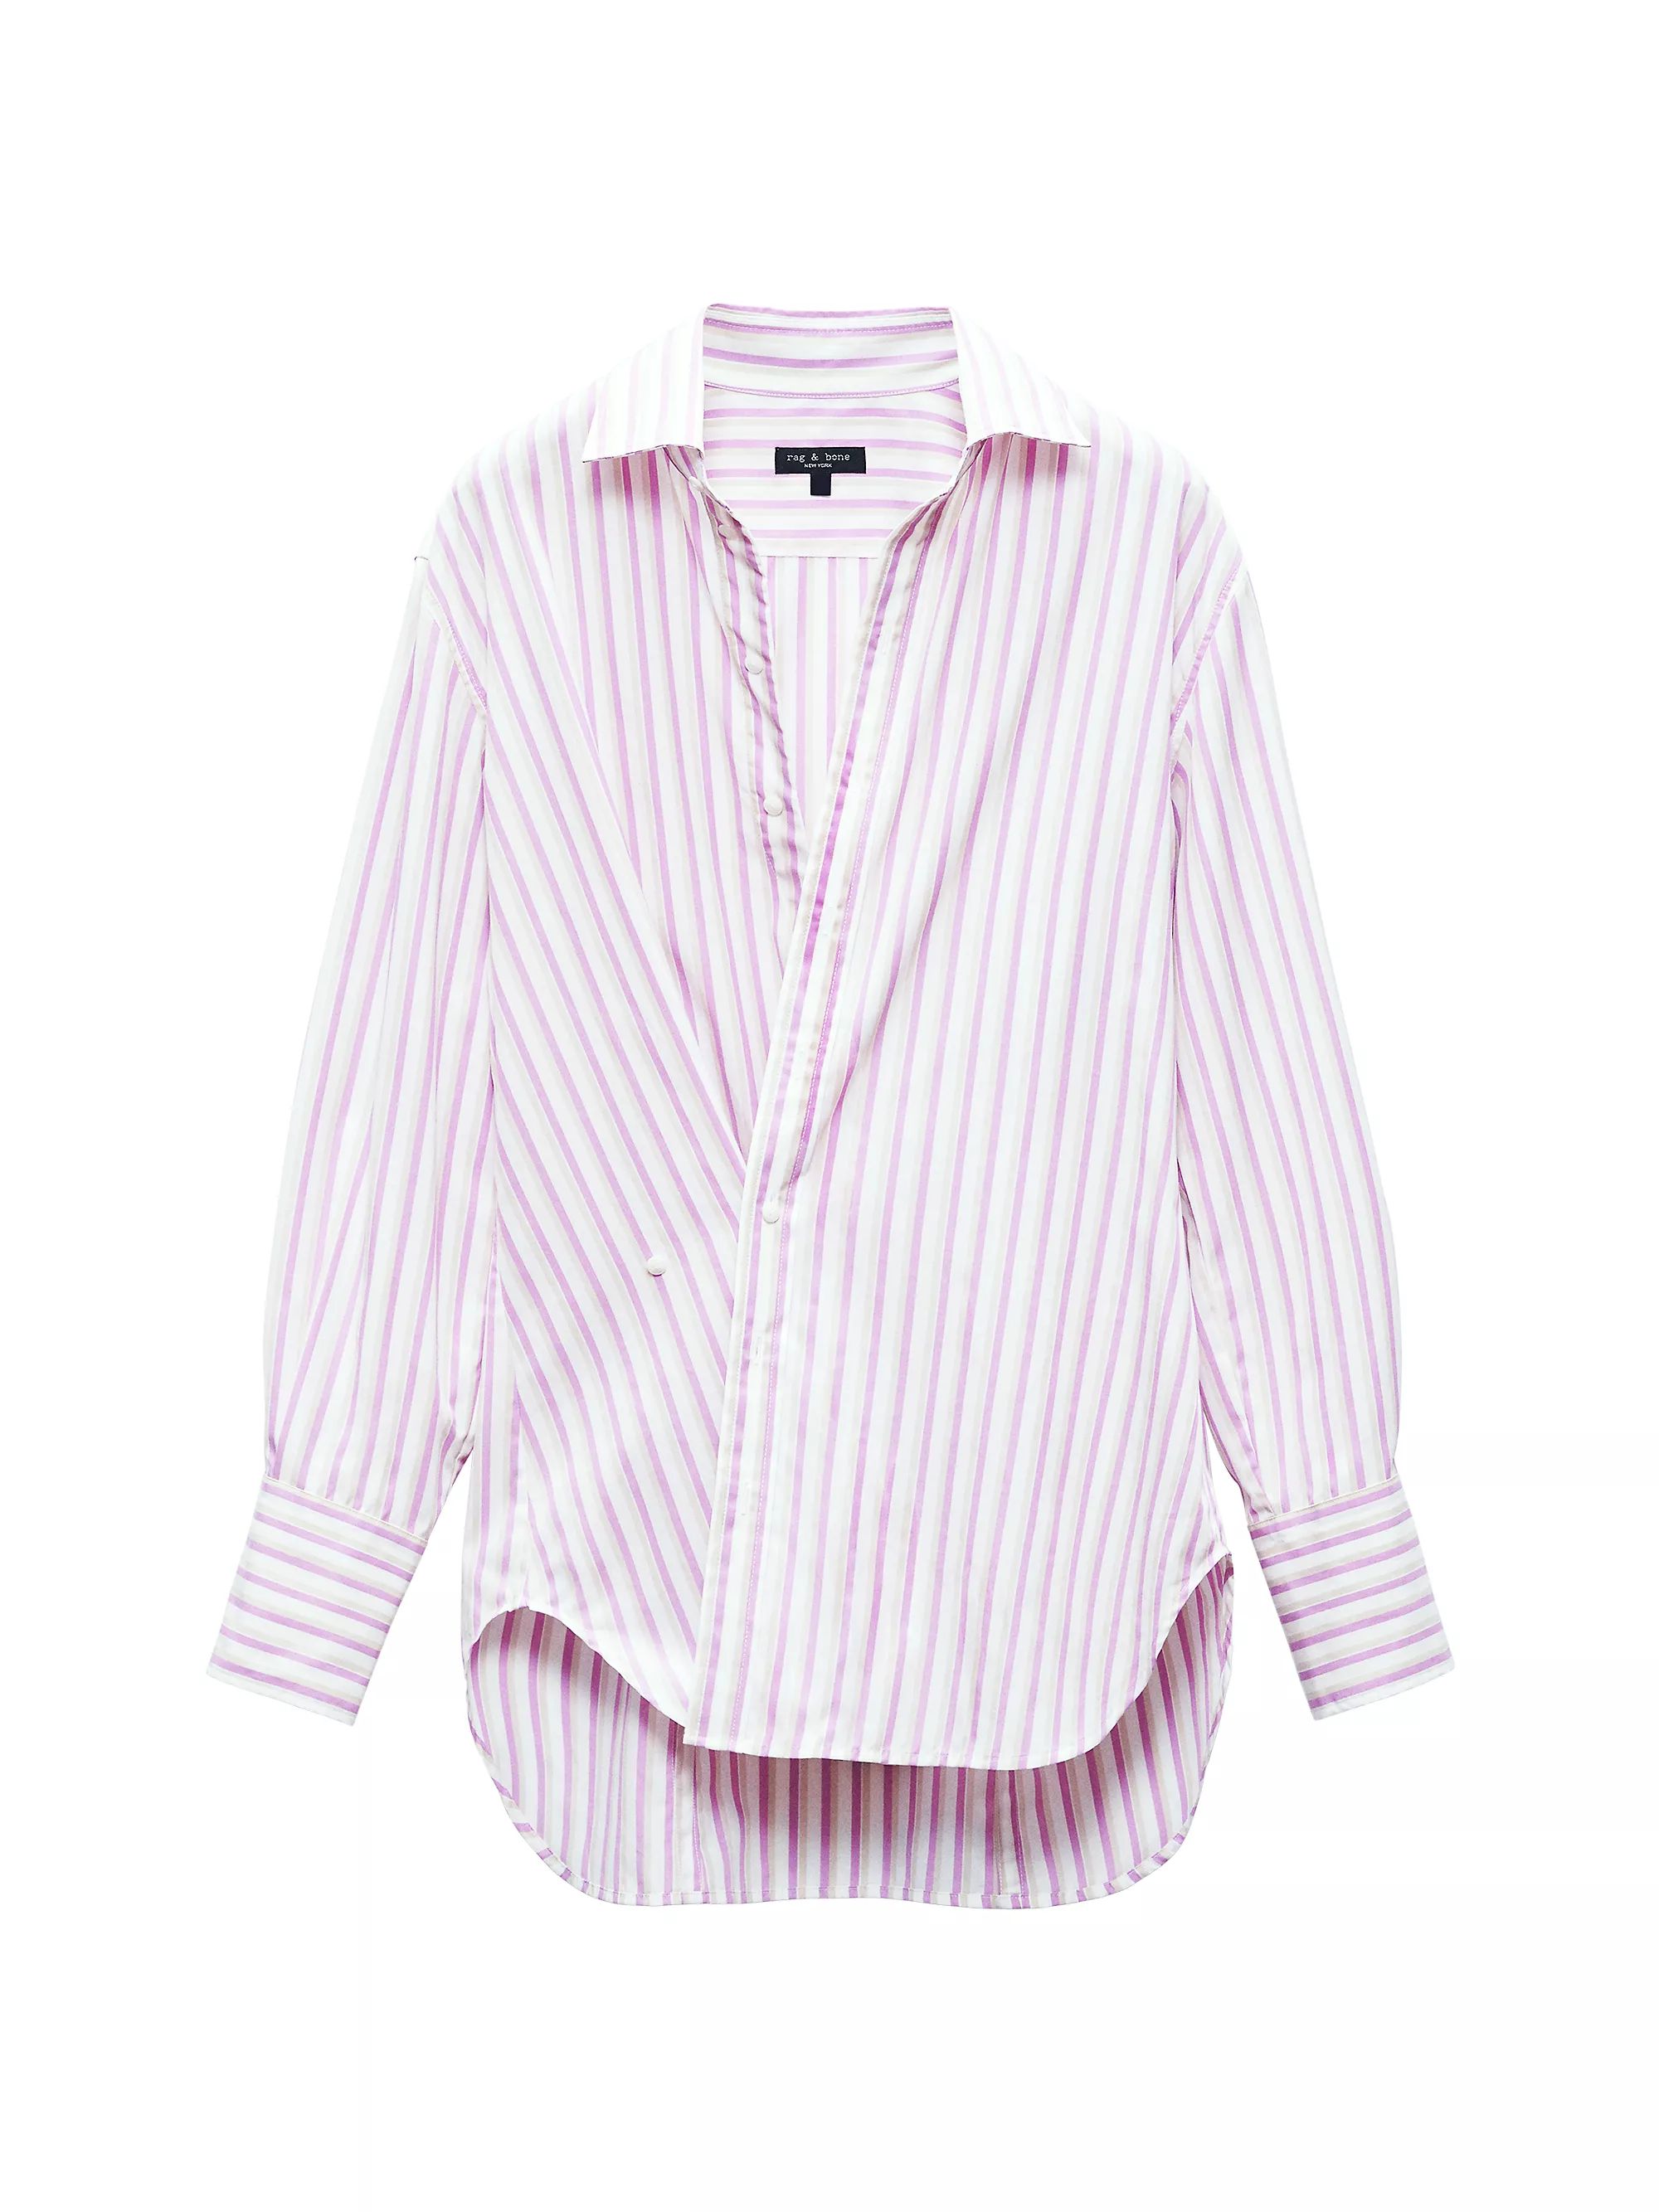 Indiana Striped Twisted Shirt | Saks Fifth Avenue